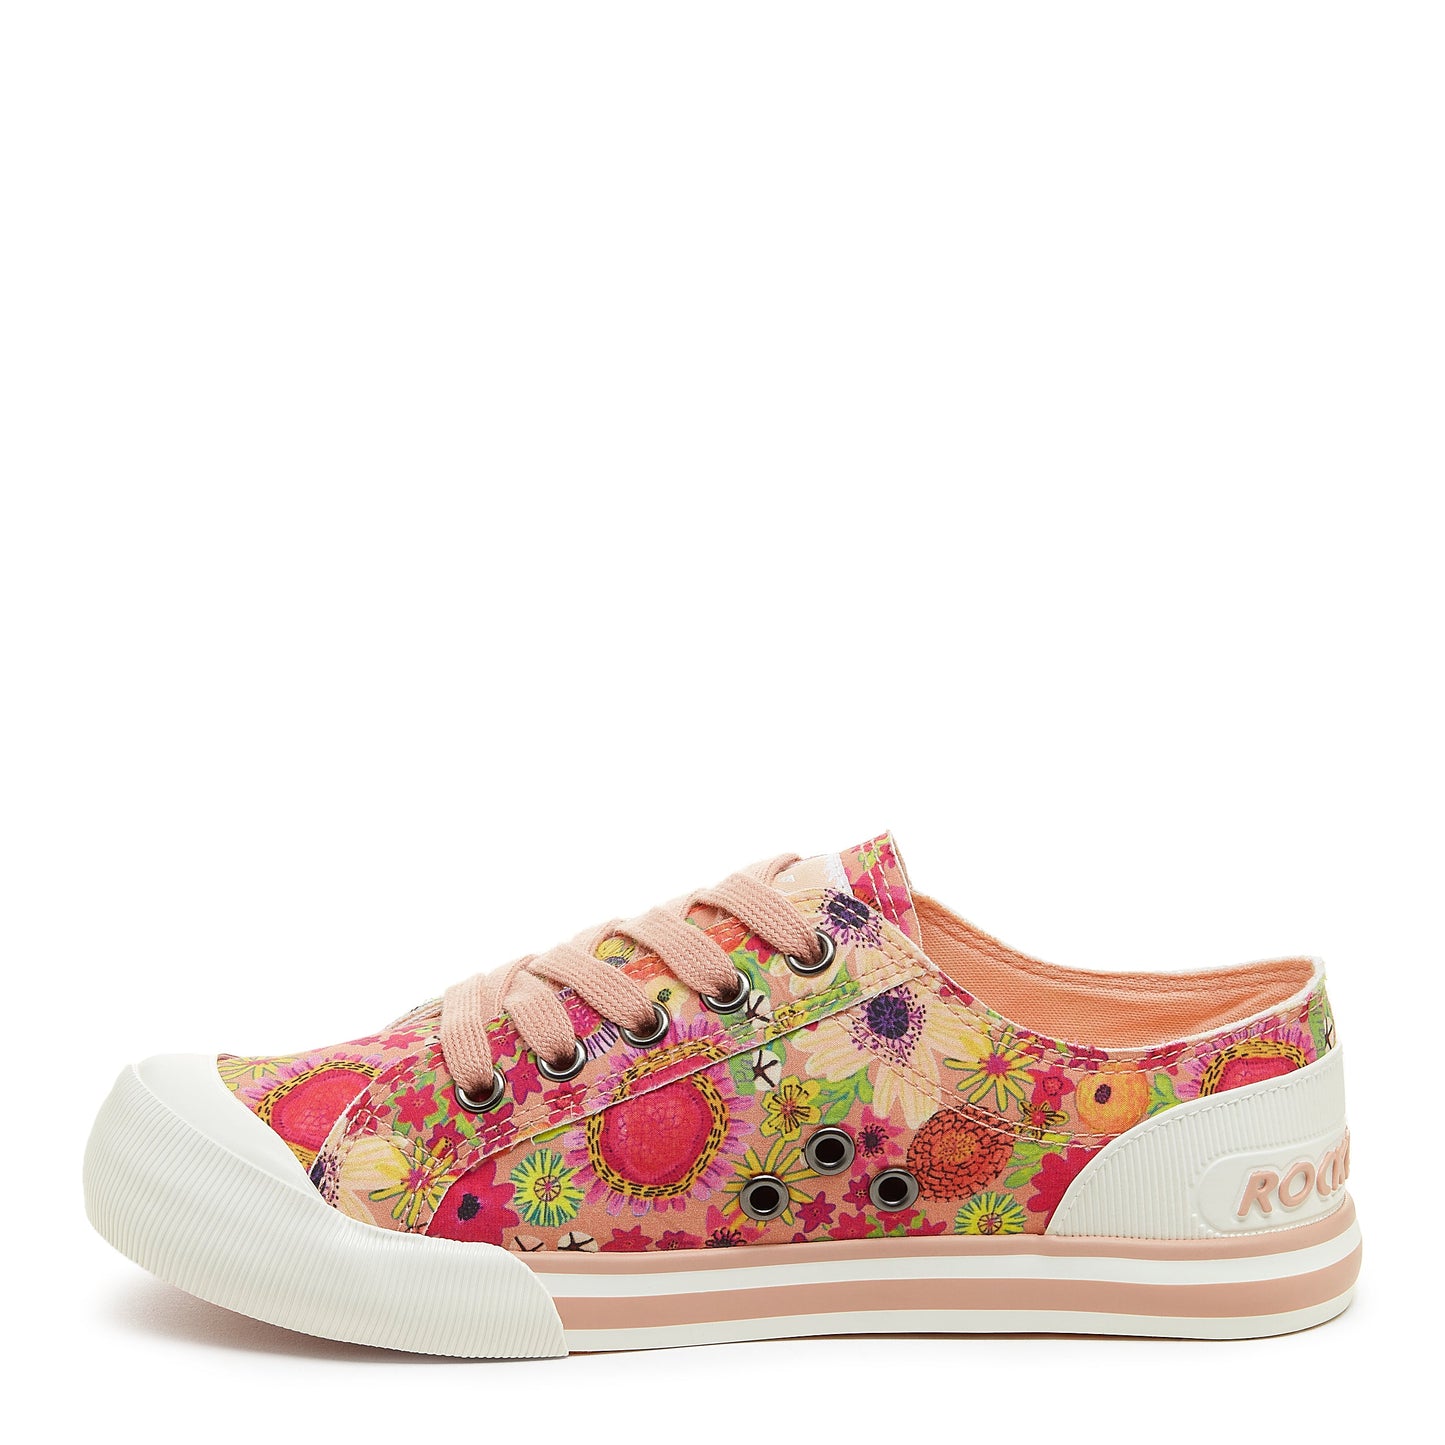 Jazzin Bright Pink Floral Trainers